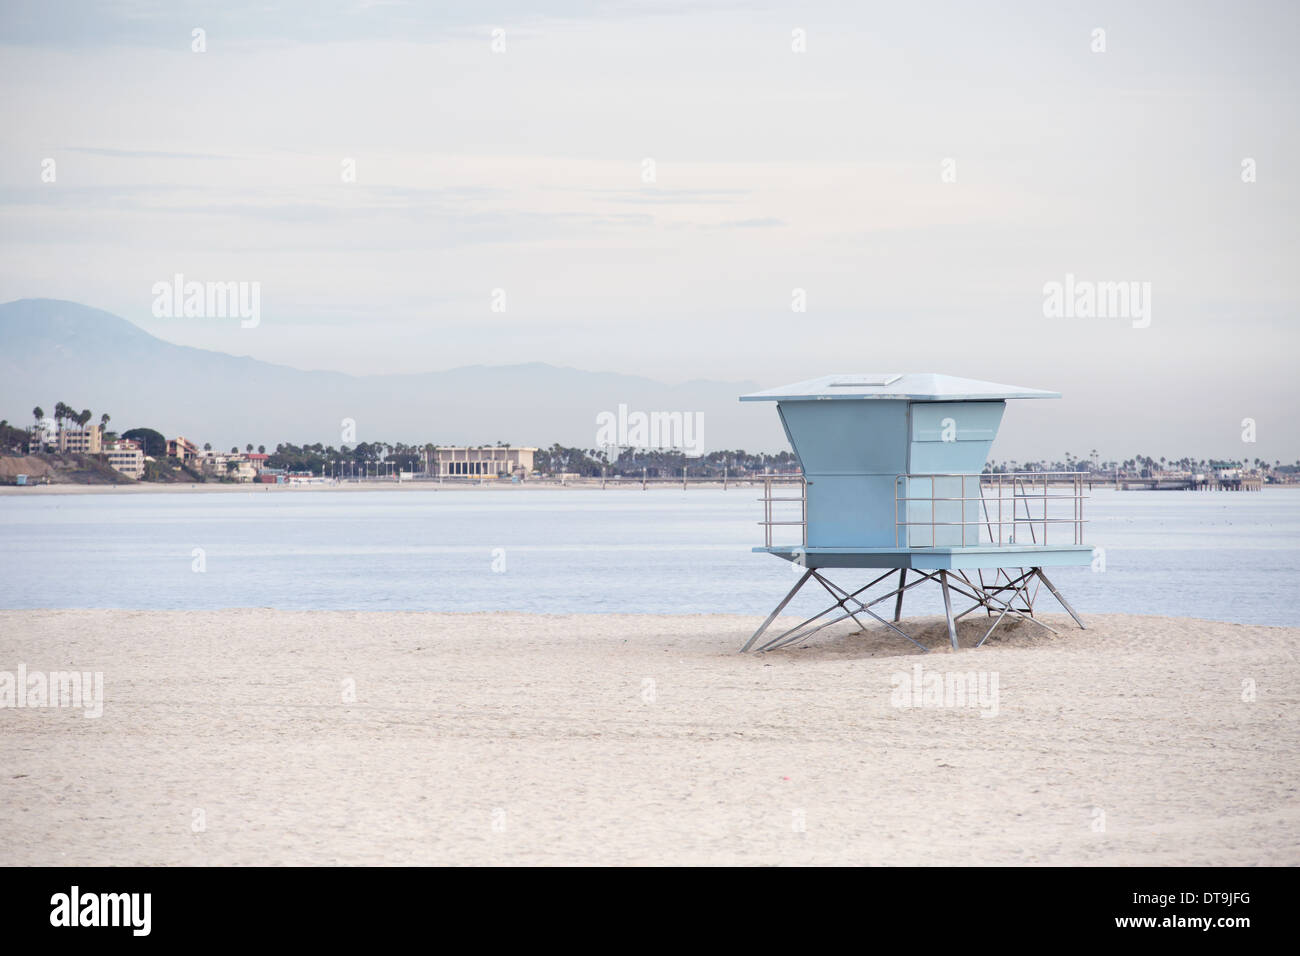 Life guard station on beach with calm ocean. Stock Photo